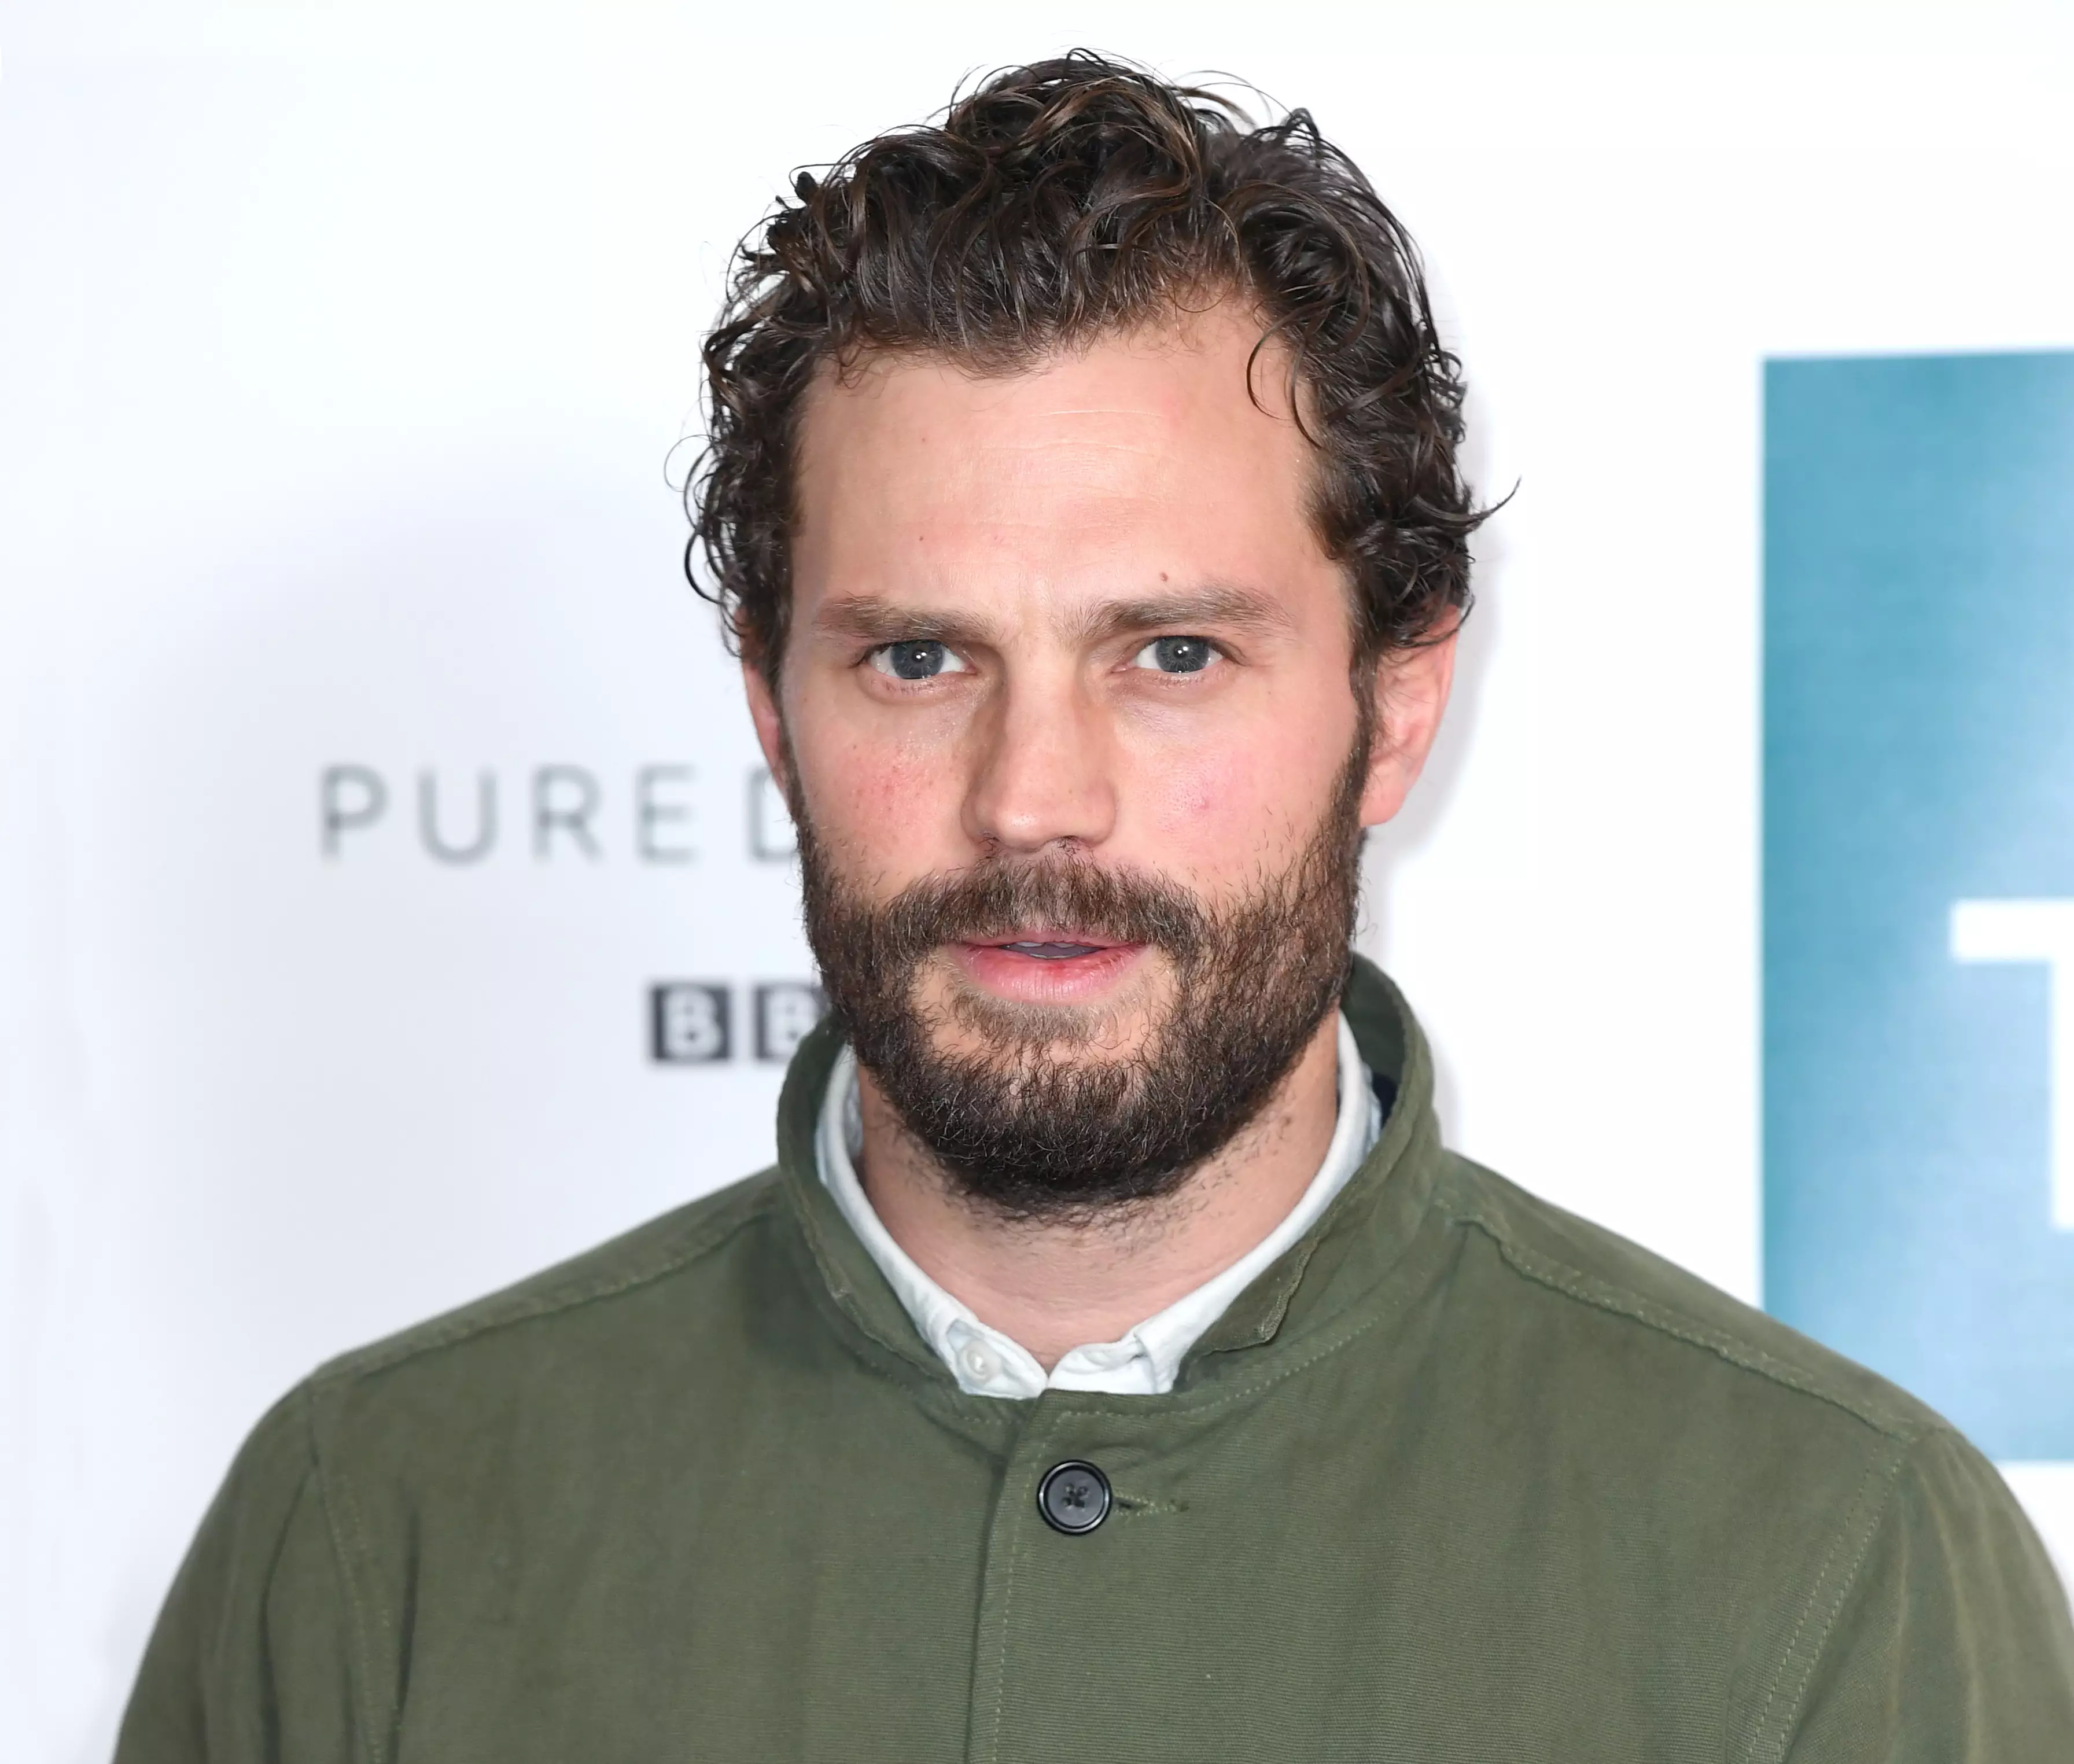 Northern Irish was voted second sexiest accent. I'm sure Jamie Dornan is happy about that.